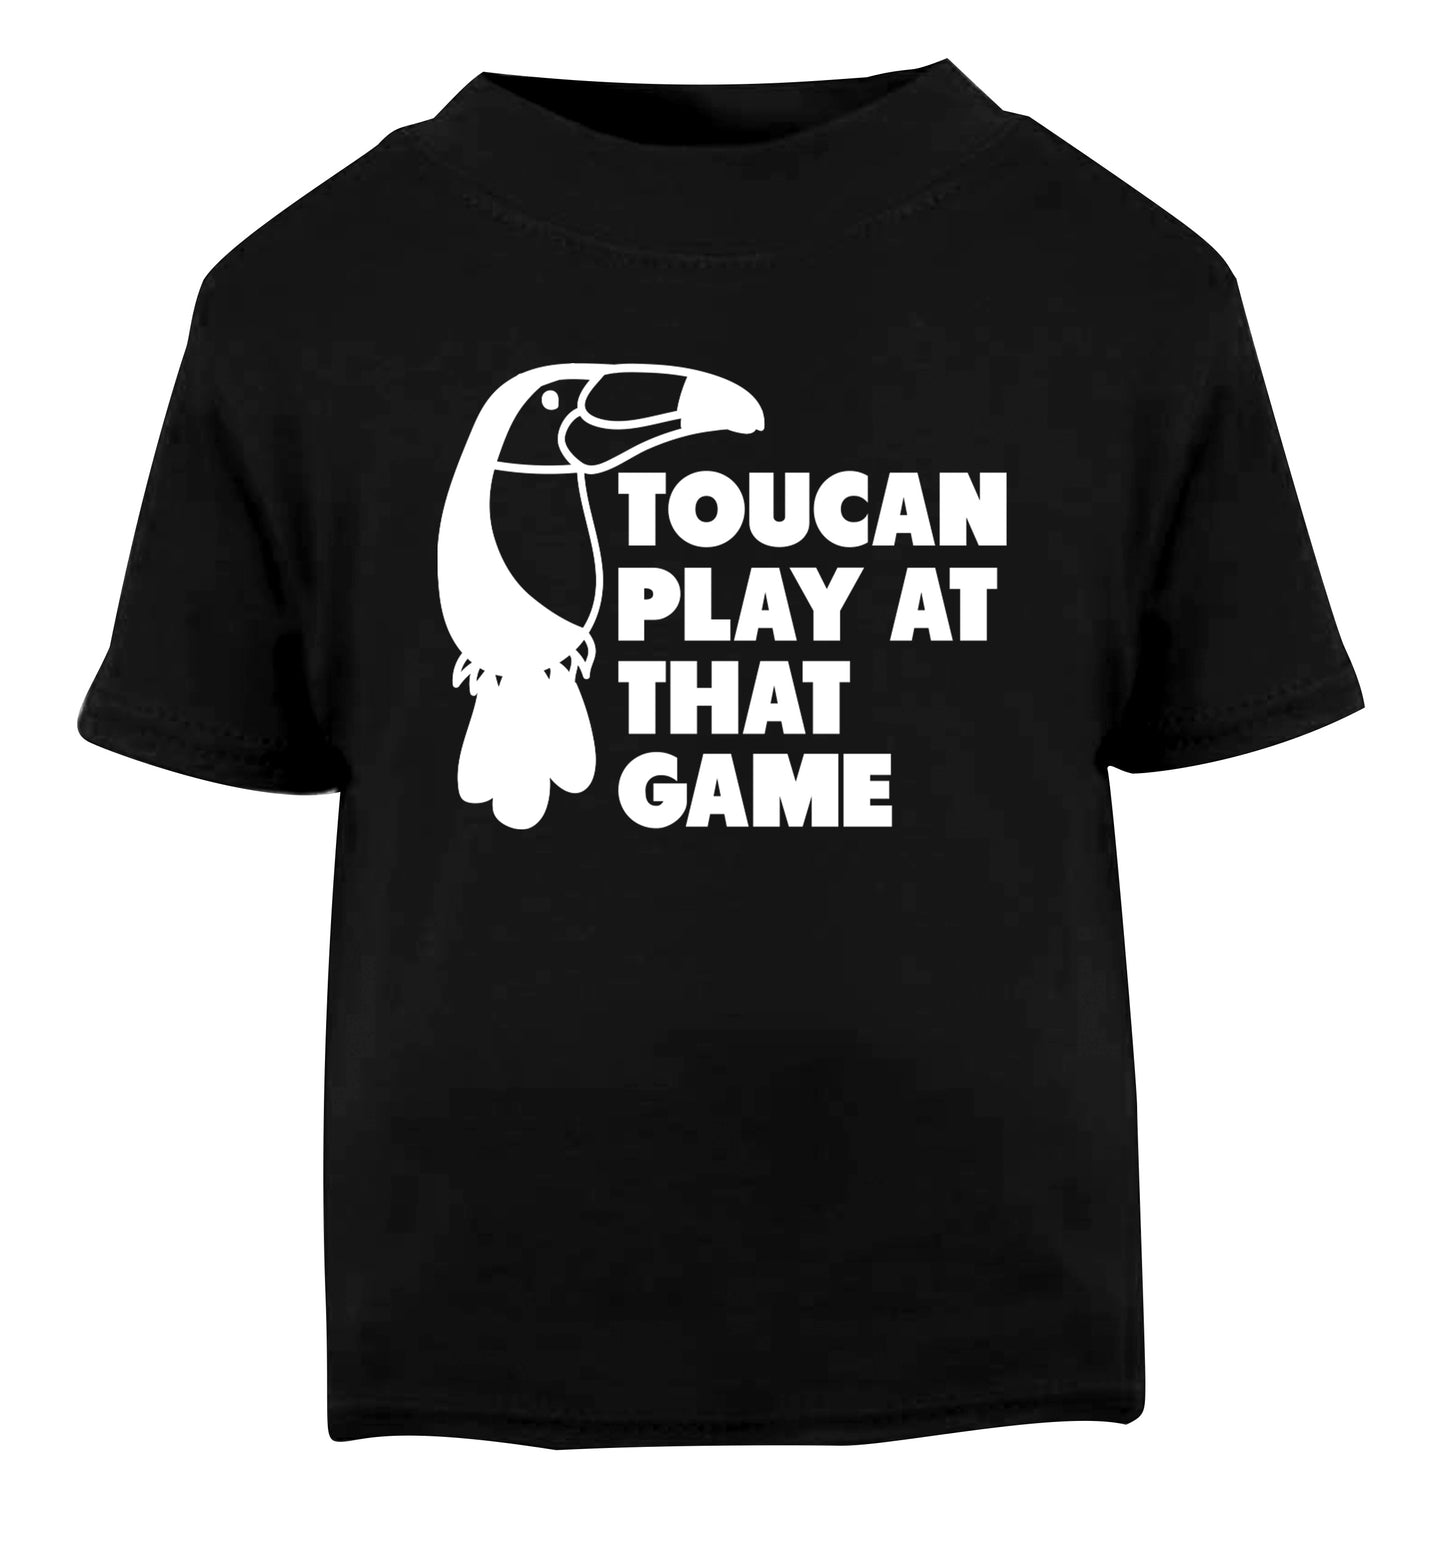 Toucan play at that game Black Baby Toddler Tshirt 2 years